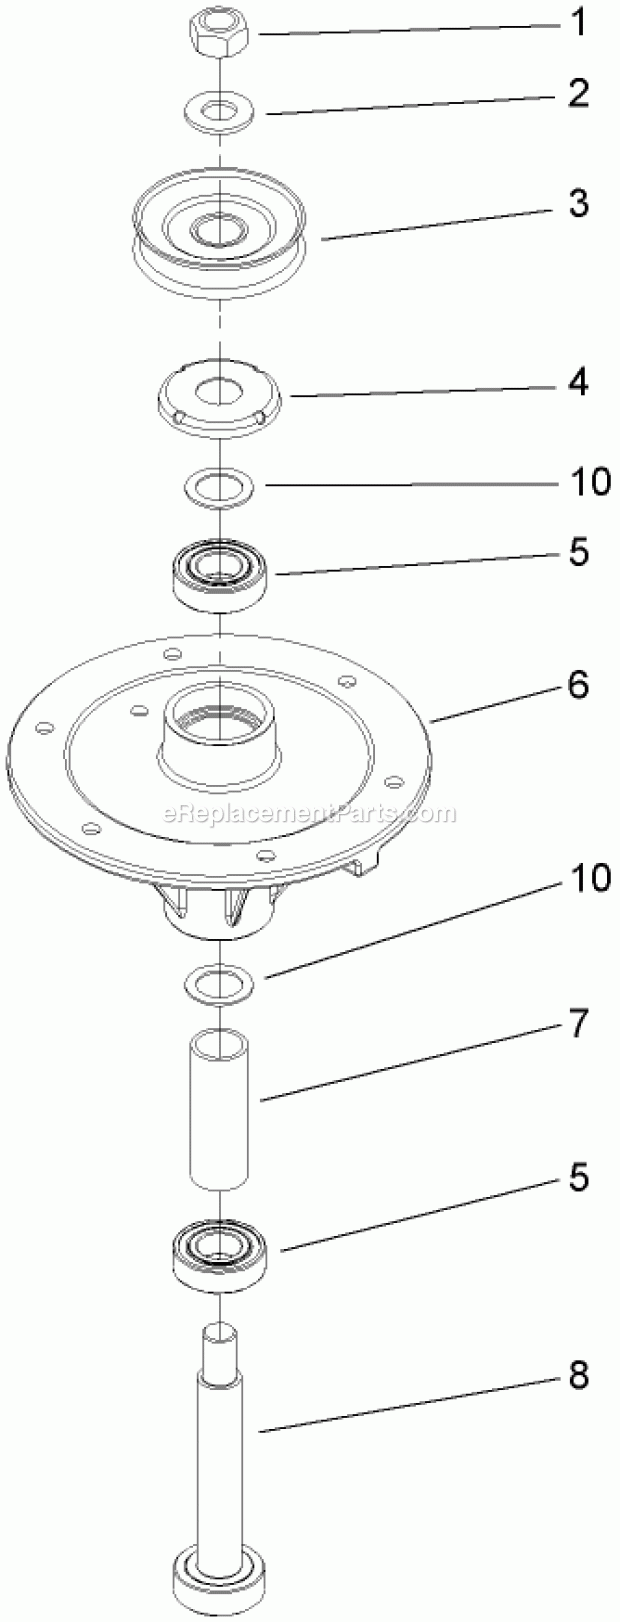 Toro 74409 (280000001-280999999) Z300 Z Master, With 40in 7-gauge Side Discharge Mower, 2008 Spindle Assembly No. 110-9963 Diagram